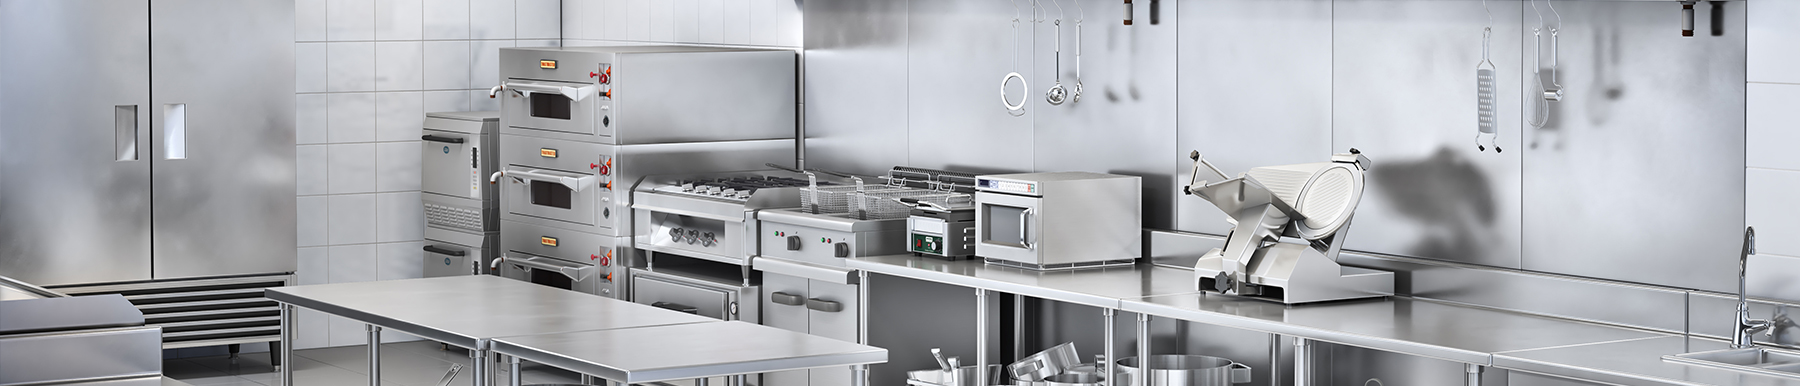 Catering Equipment Suppliers Near Calderdale | H2 Catering Equipment Catering Equipment